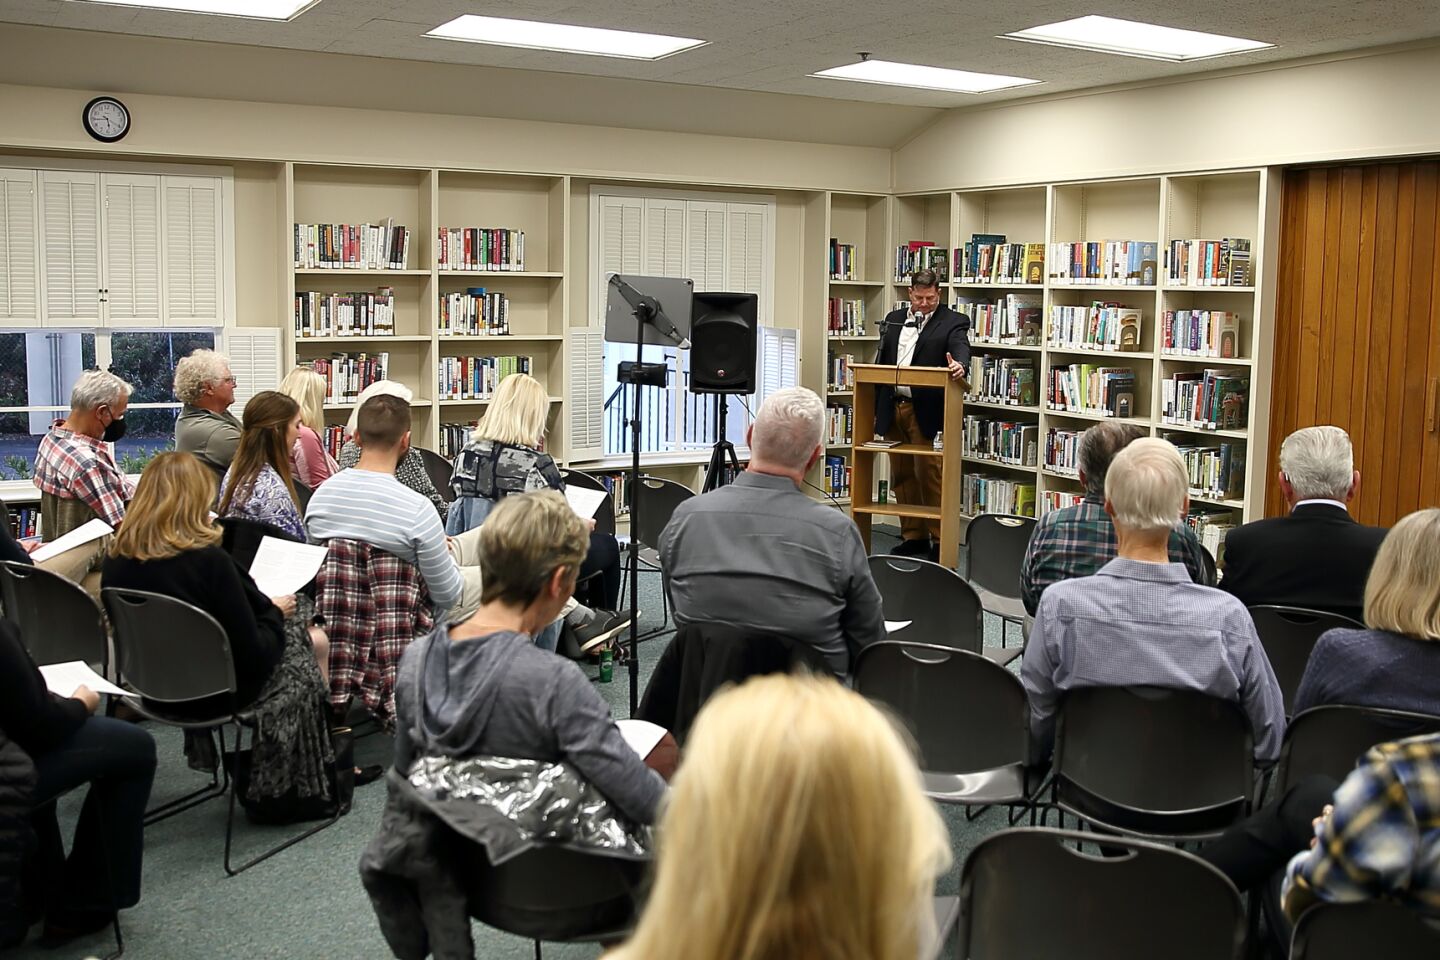 Professor Robert Bernard Hass speaks to the full audience at the March 7 event held at the RSF Library.